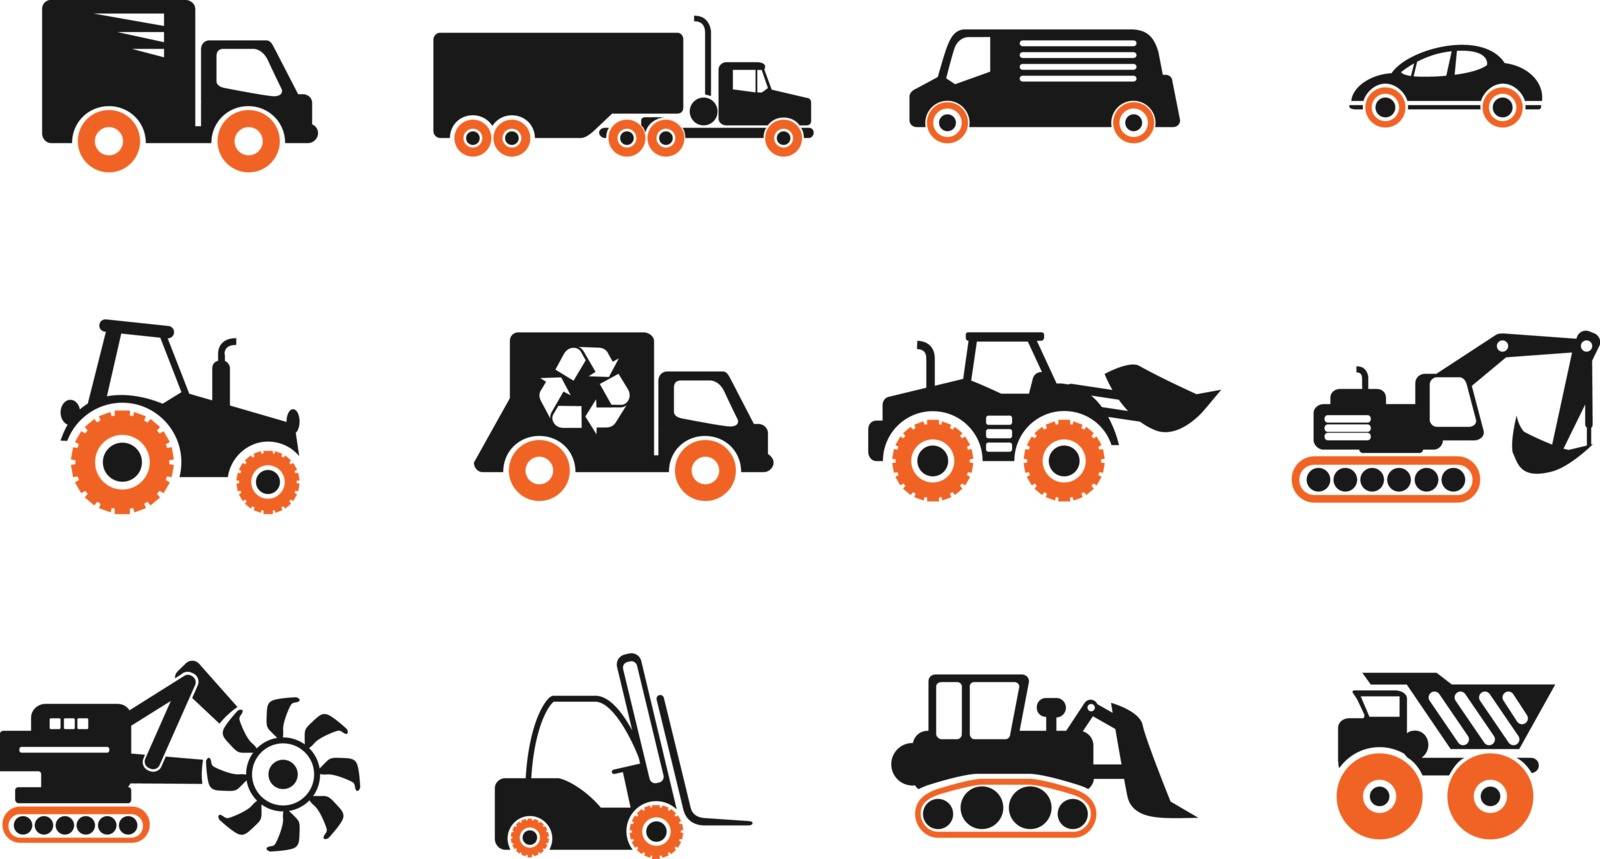 Transportation simply icons by ayax